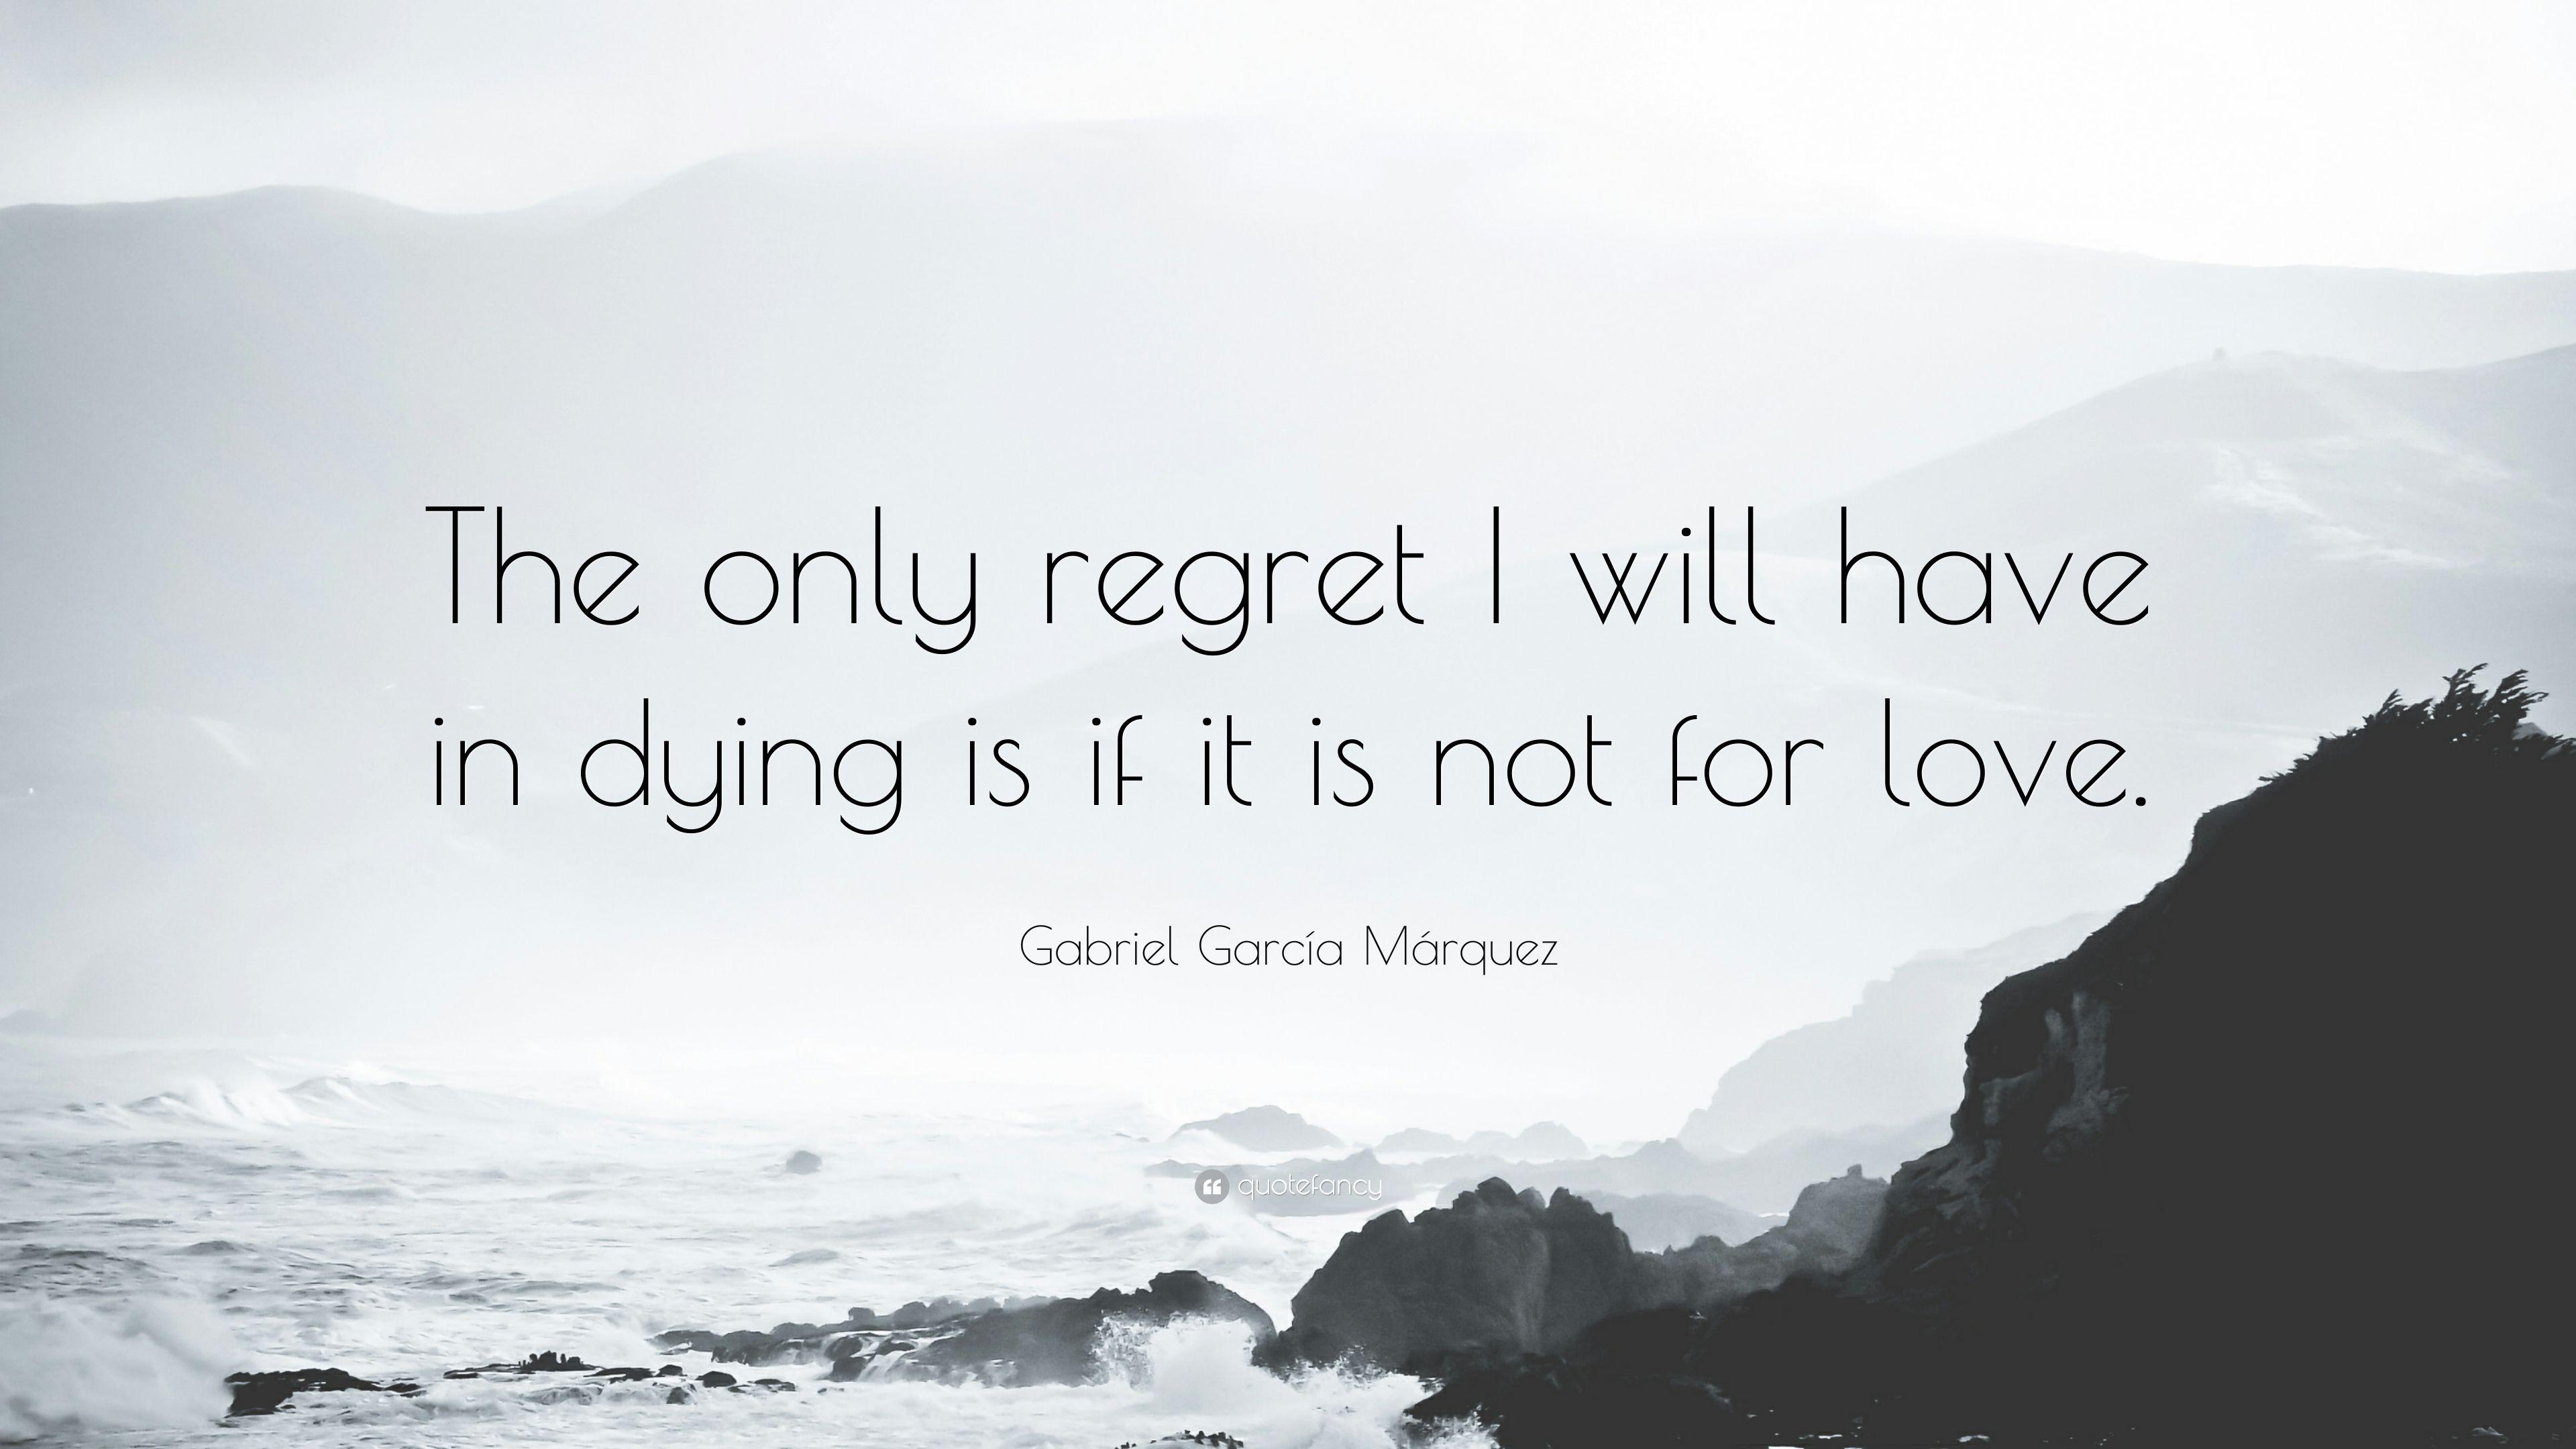 Gabriel García Márquez Quote: “The only regret I will have in dying